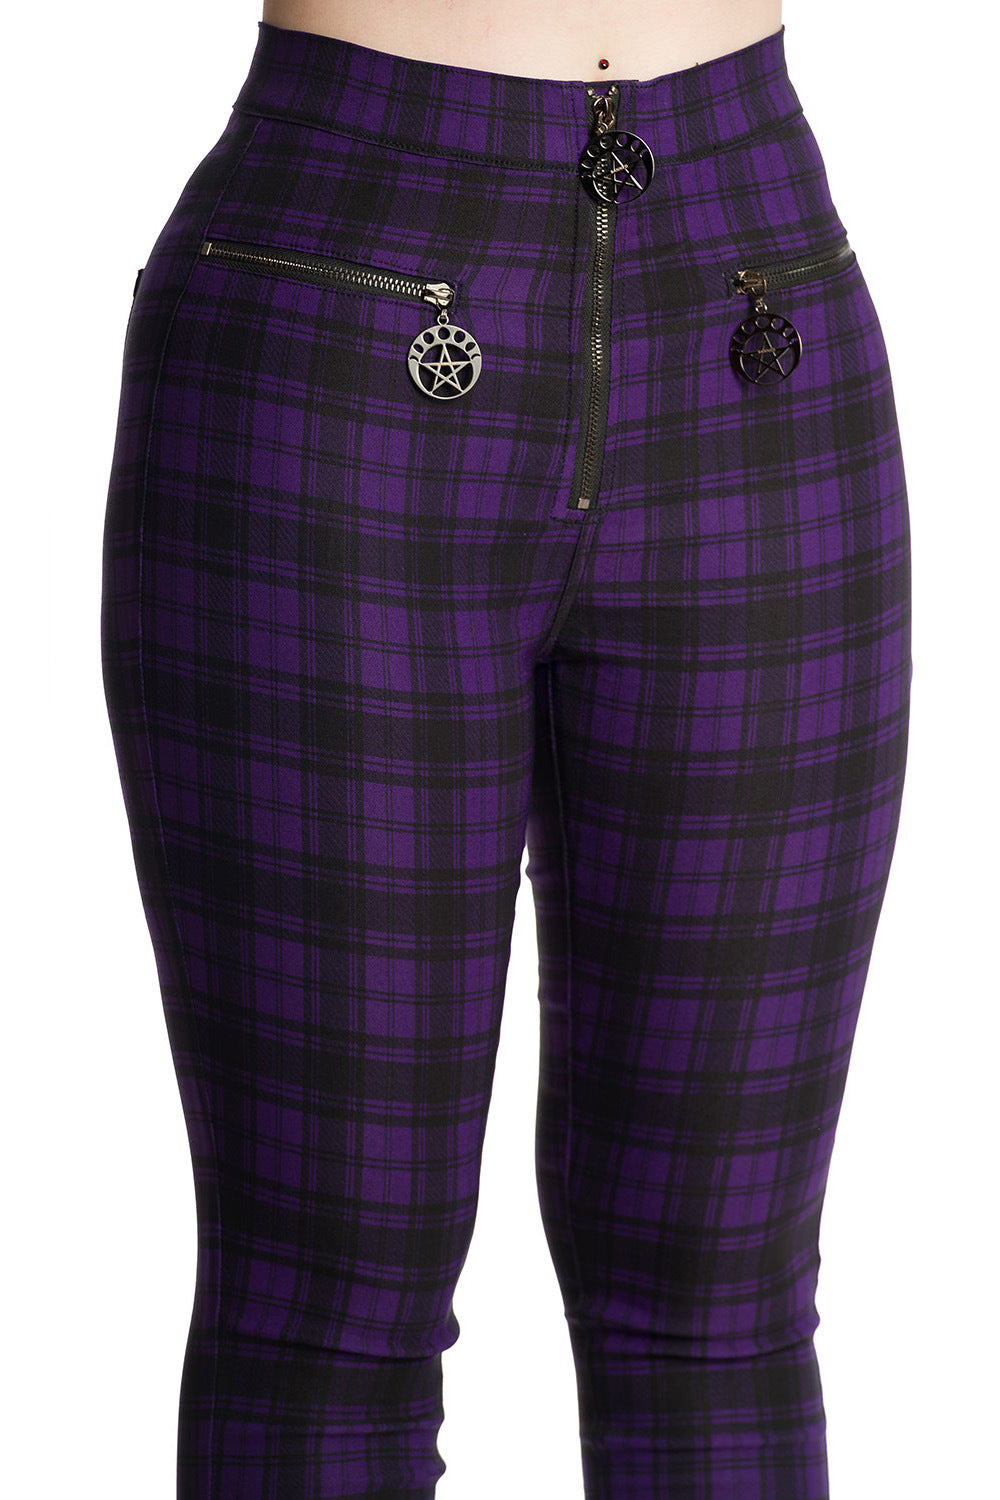  Banned Tartan Skinny Trousers Enchanted Check Bright Red Punk  Gothic Pants - Red (S) : Clothing, Shoes & Jewelry